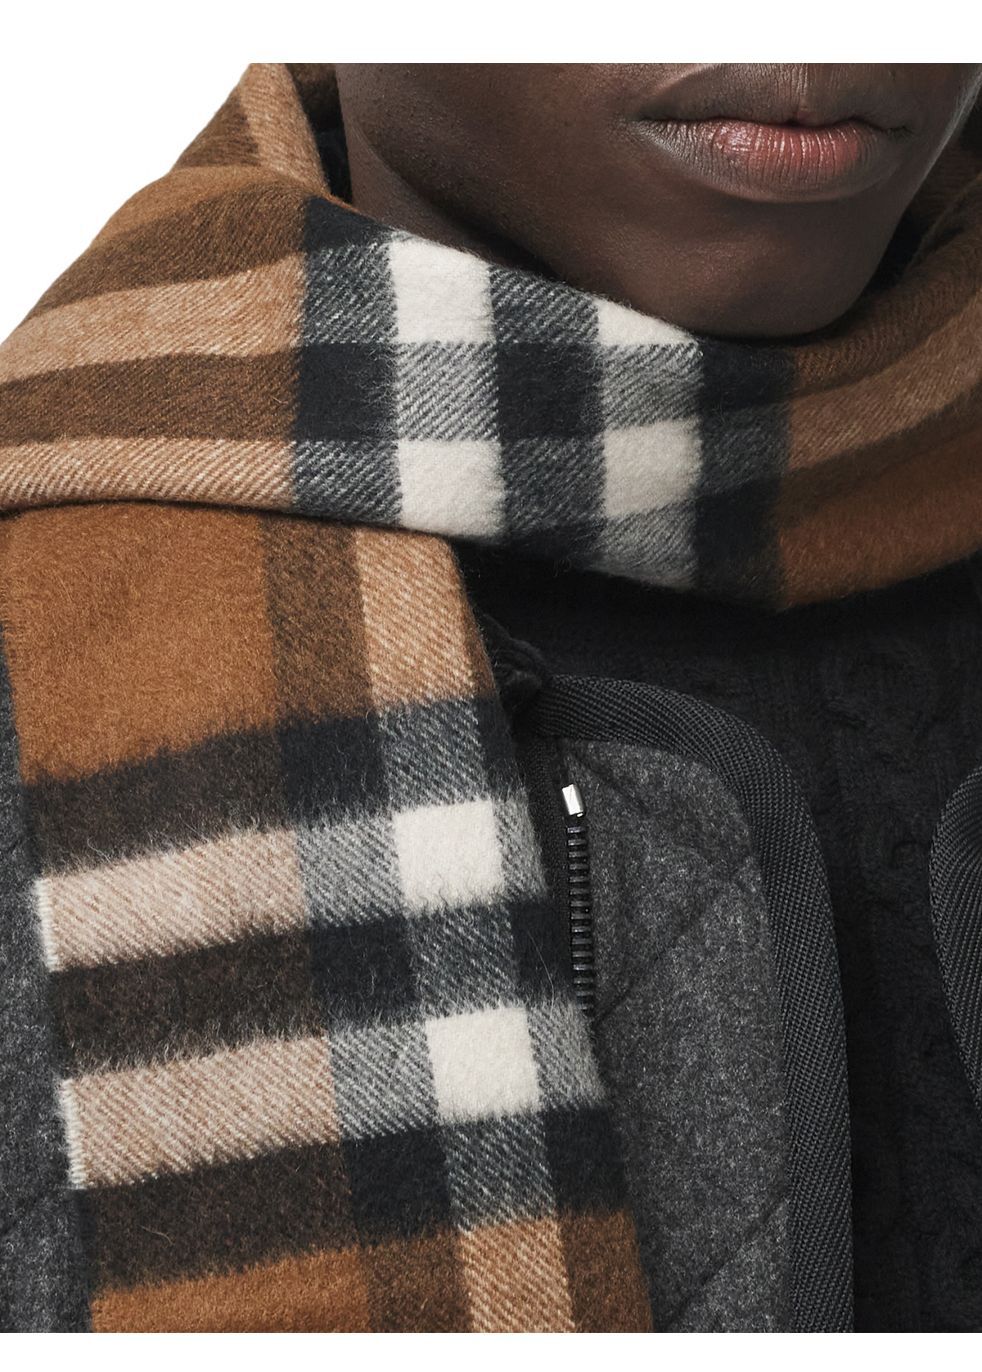 Burberry The Burberry Check Cashmere Scarf Hats & Scarves | Heathrow ...